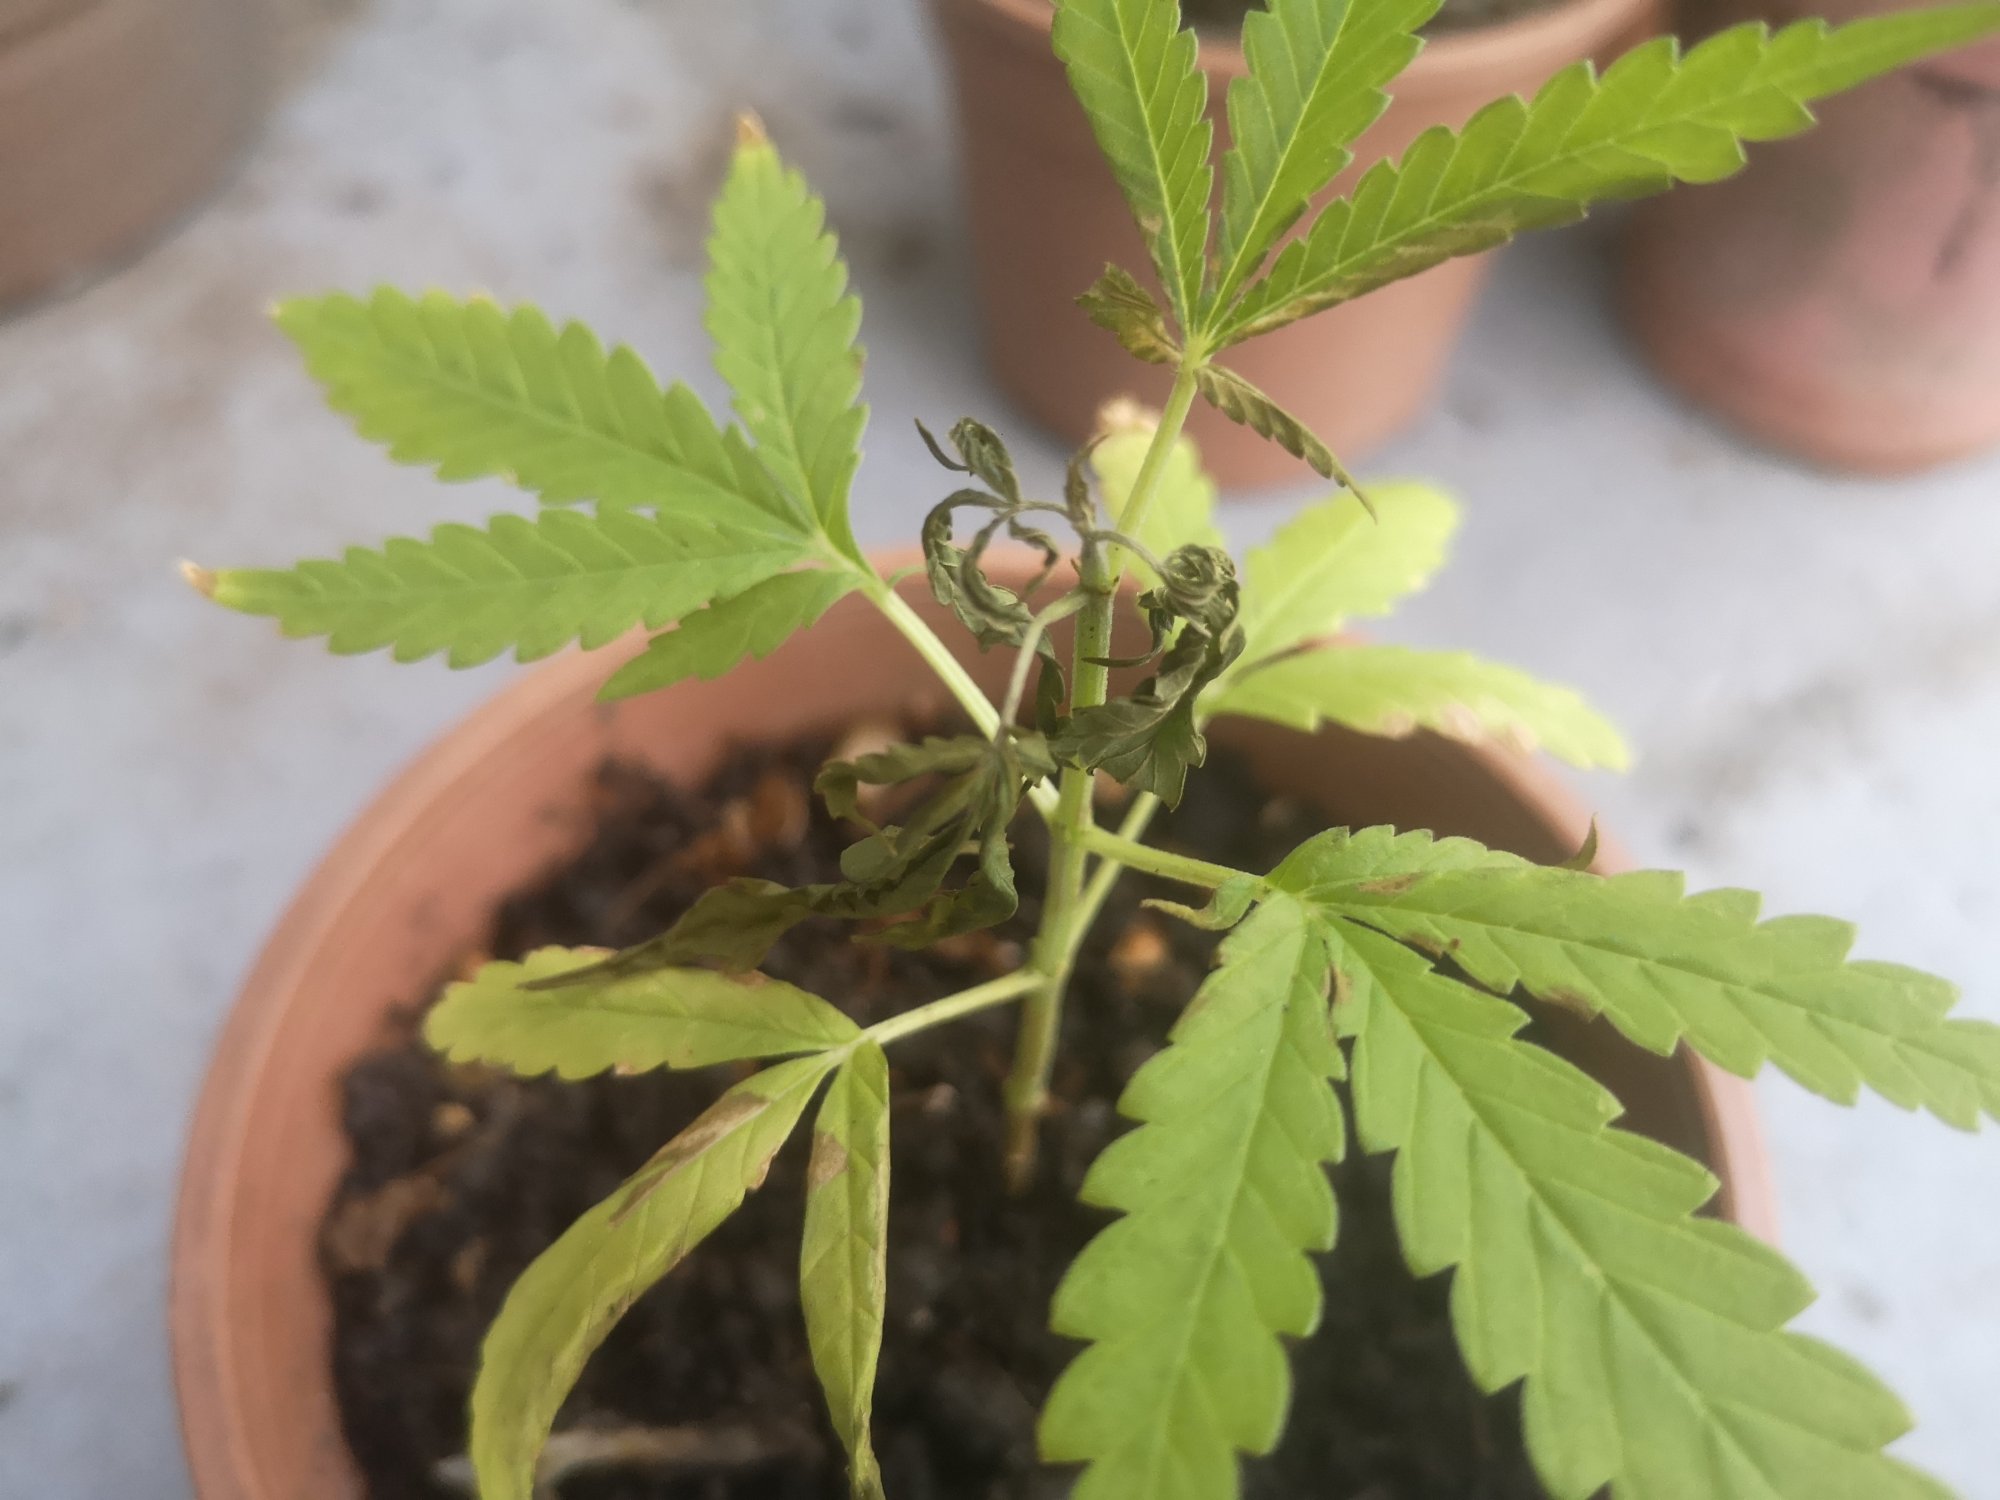 Need help on first grow due to homemade pesticide